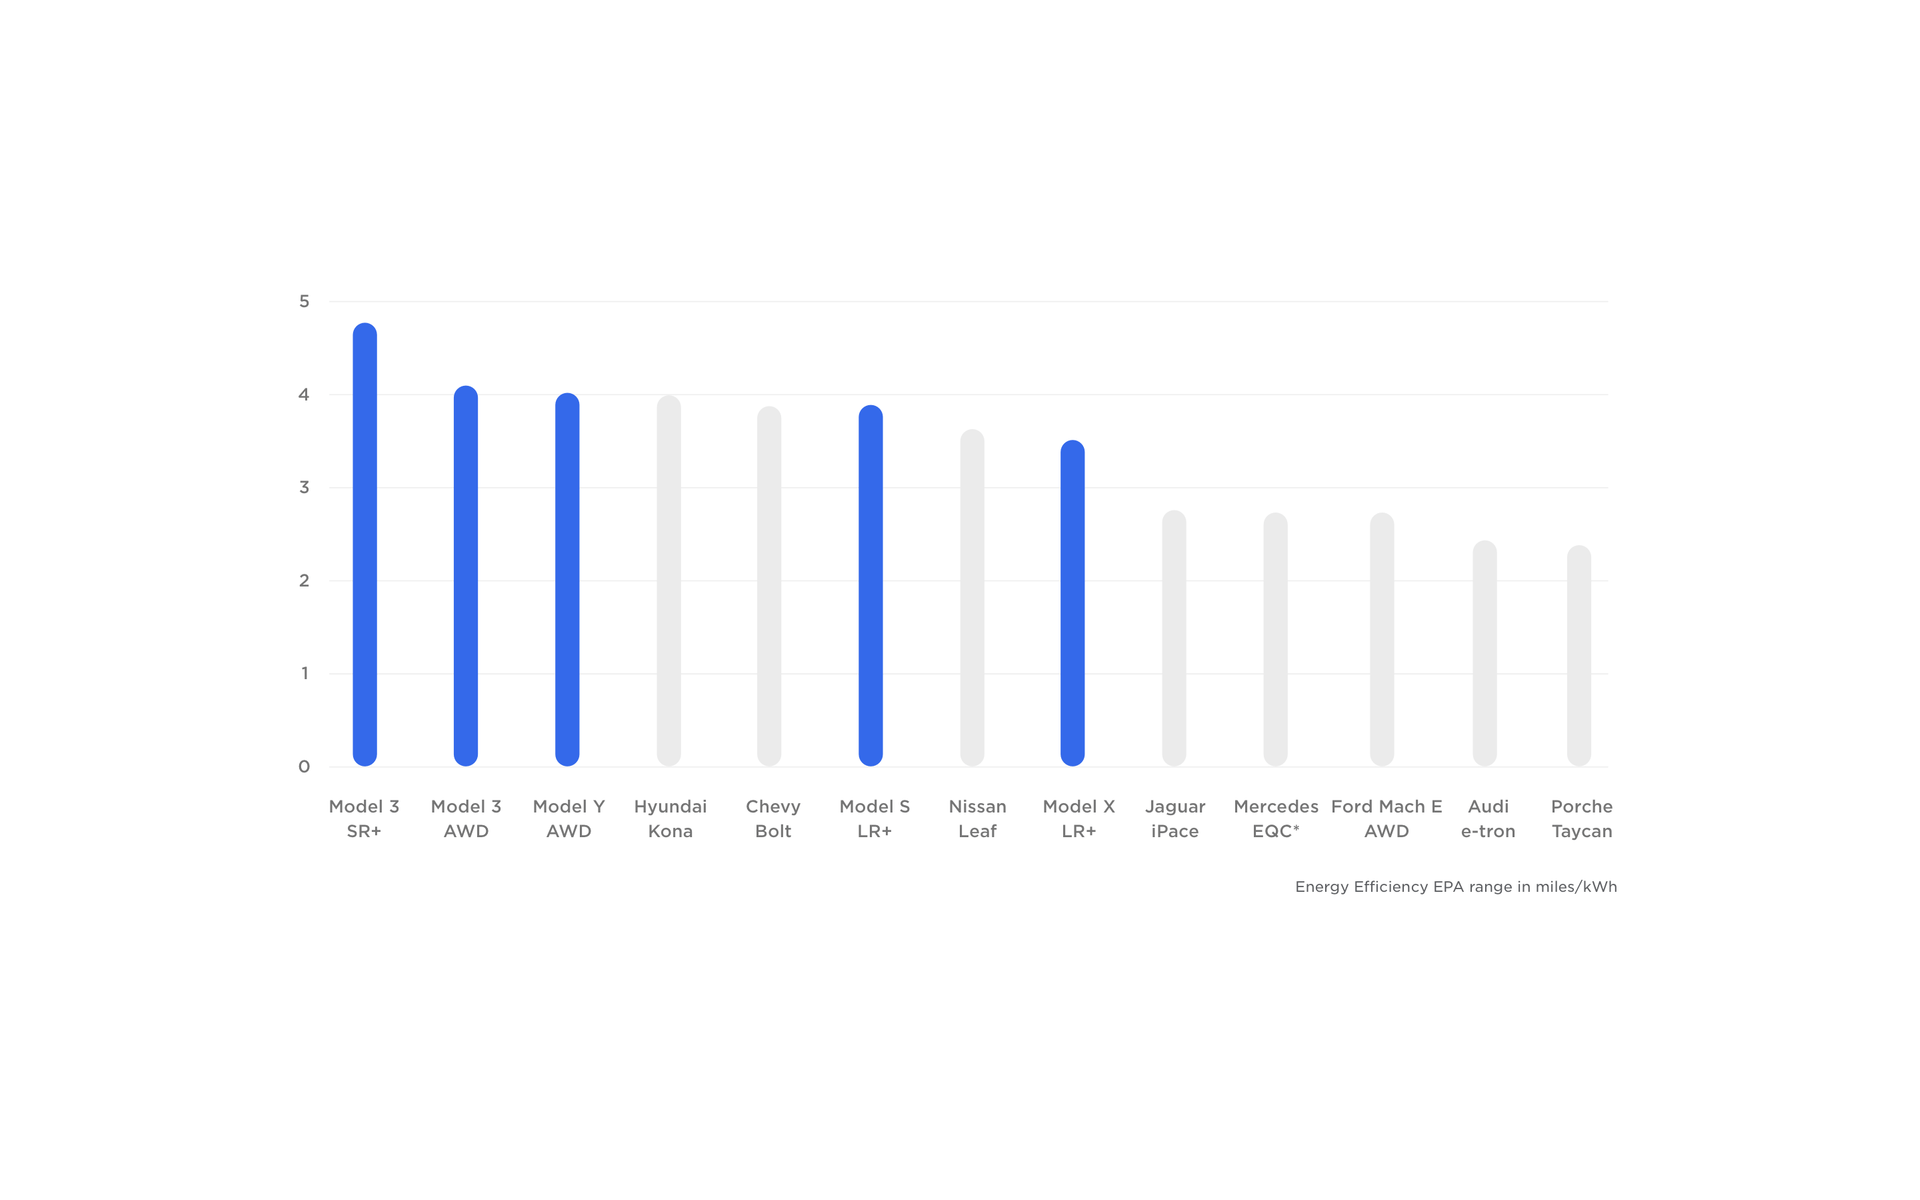 Bar chart comparing Tesla energy efficiency to other vehicles